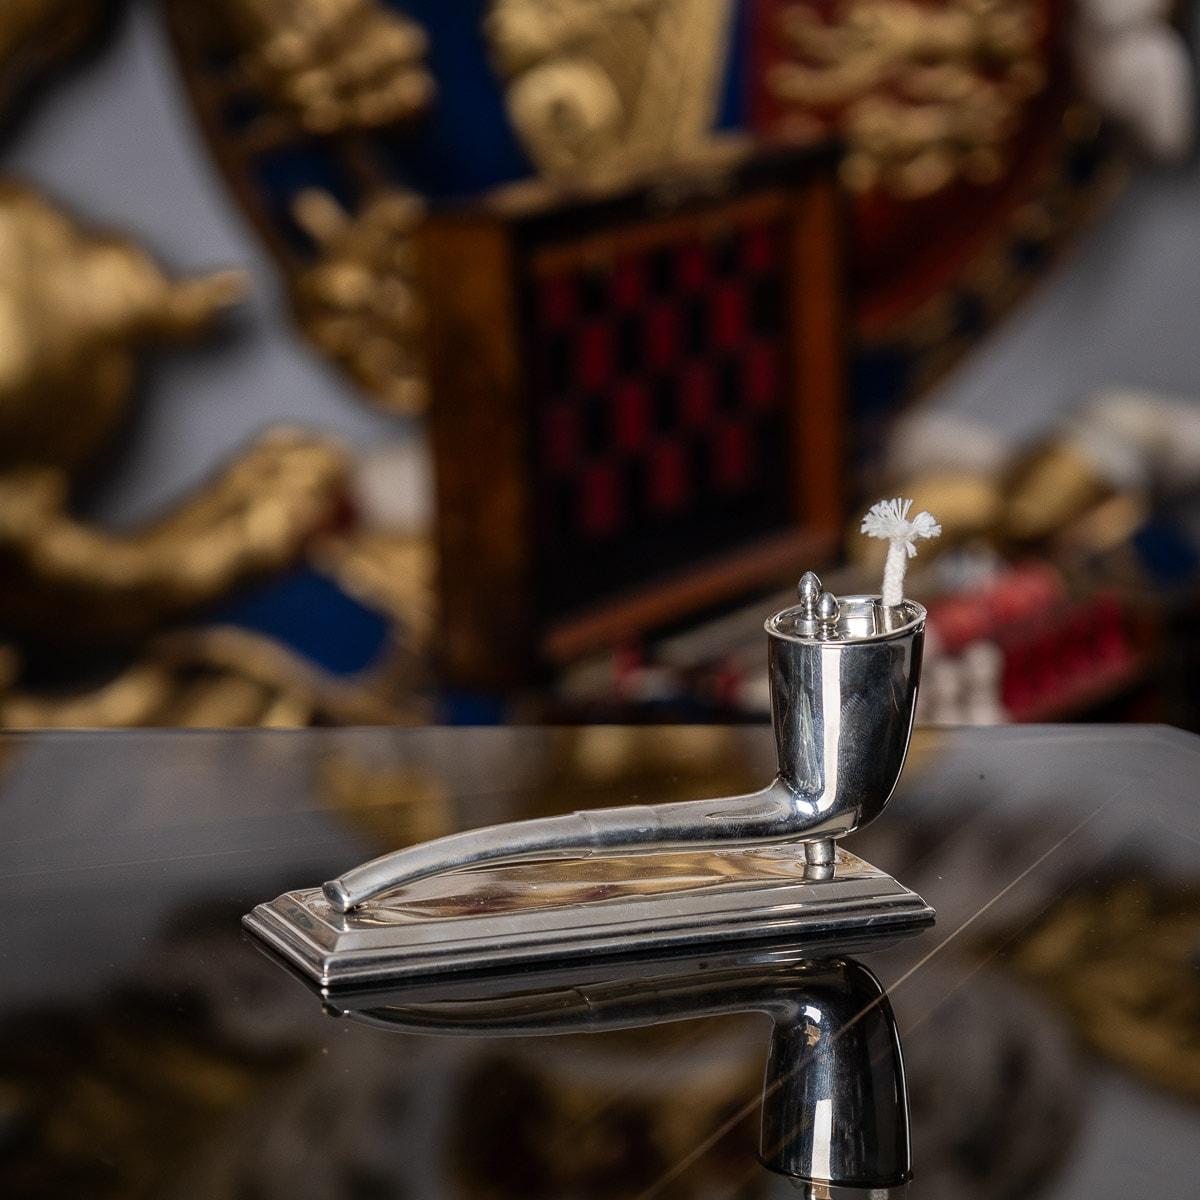 Antique early 20th century Edwardian solid silver table lighter, in a shape of a pipe on a rectangular stepped stand, the top with a wick and two lighters. Hallmarked English Silver (925 standard), Sheffield, year 1906 (o), Maker's mark J.R (John